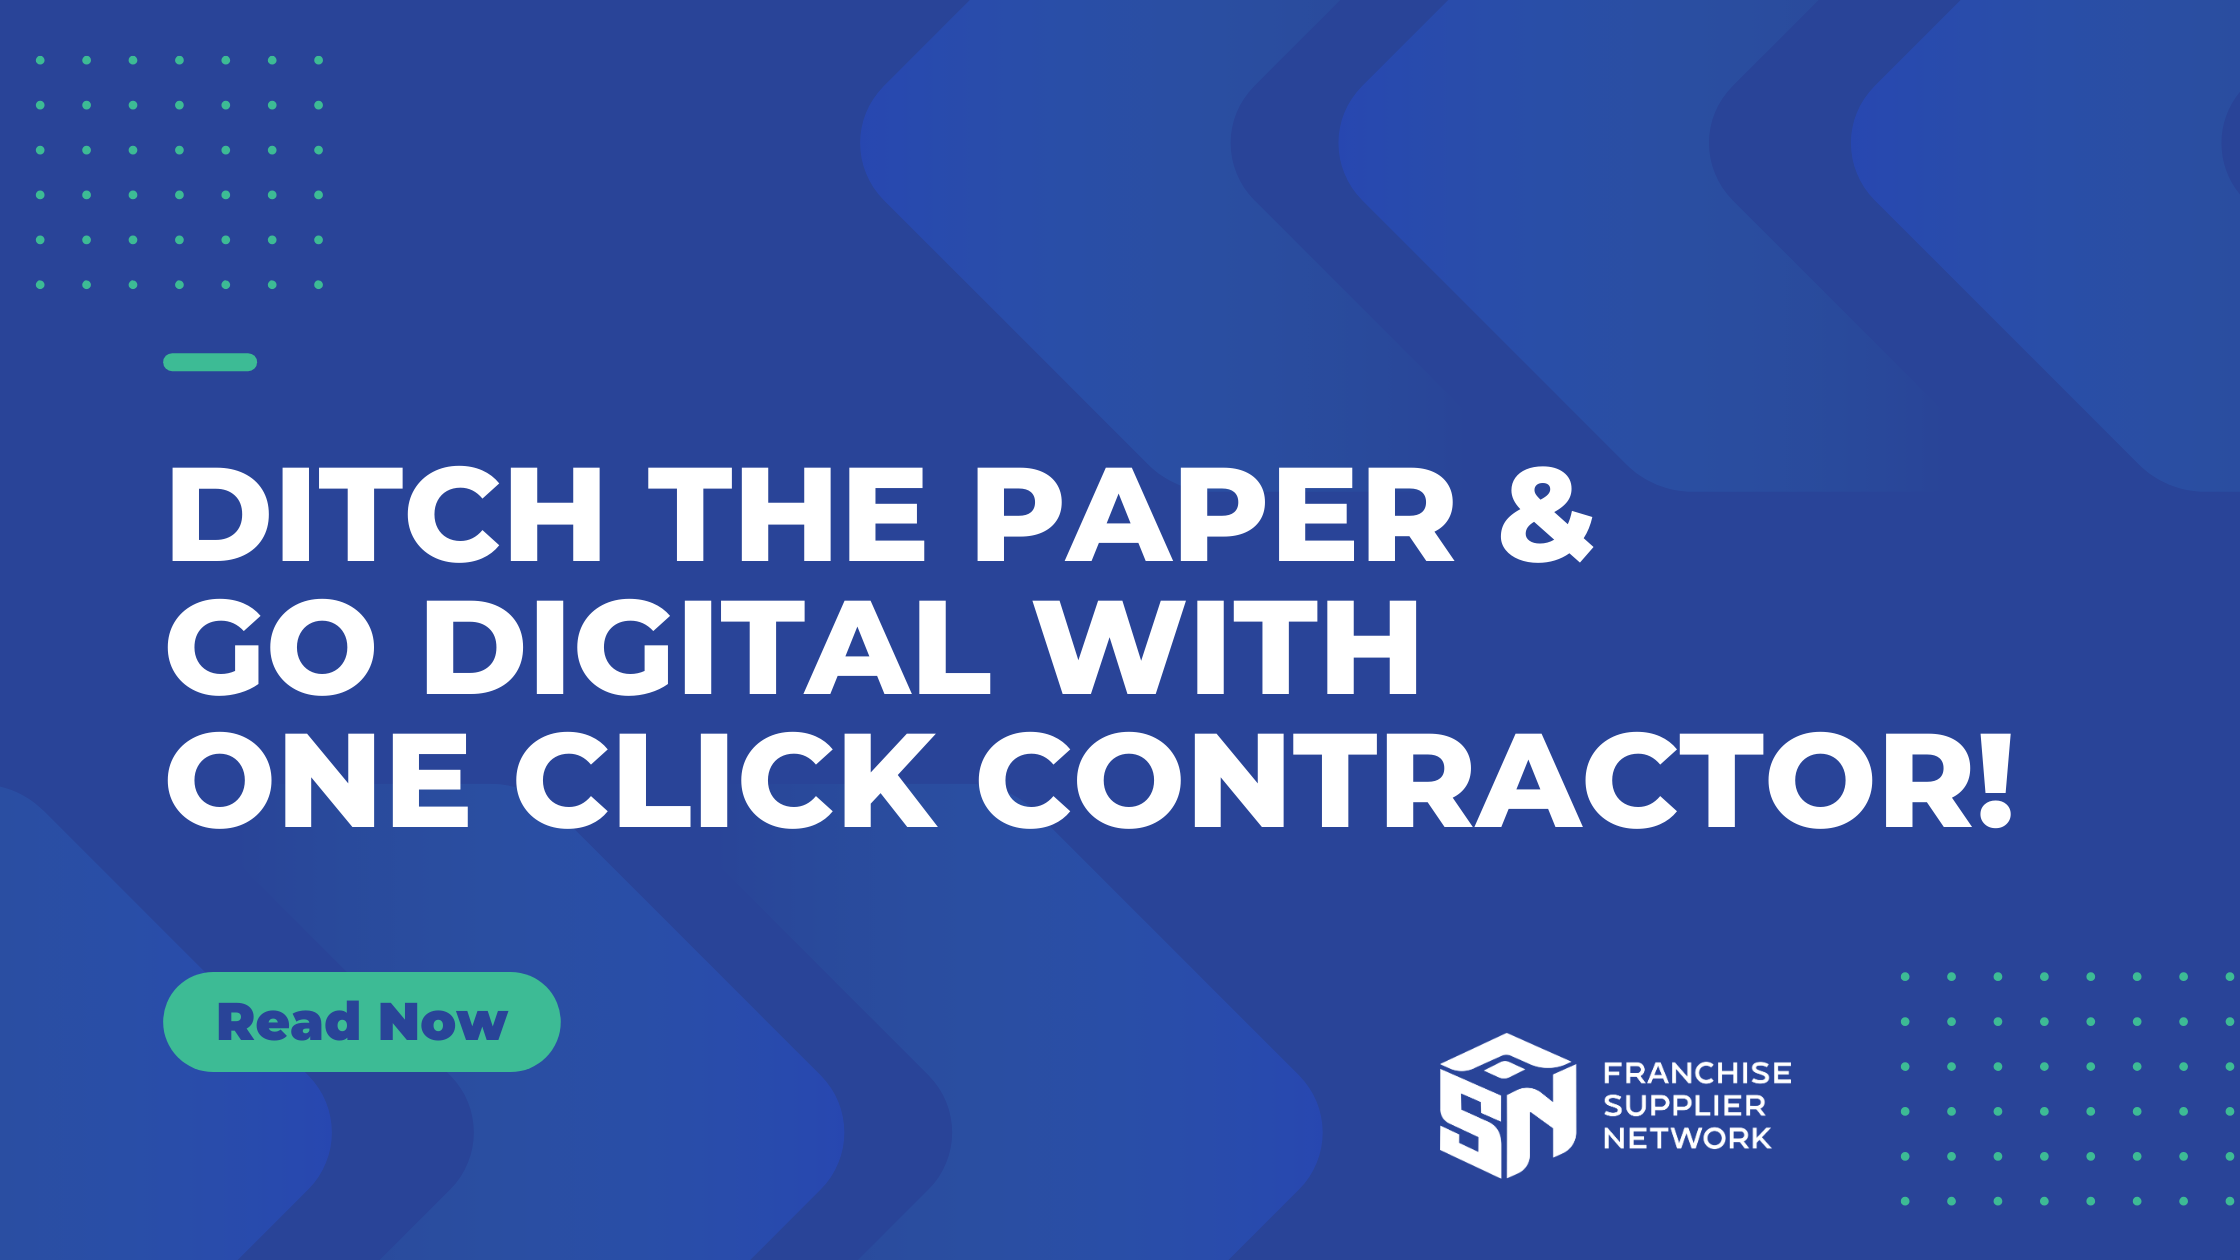 Ditch The Paper & Go Digital with One Click Contractor!